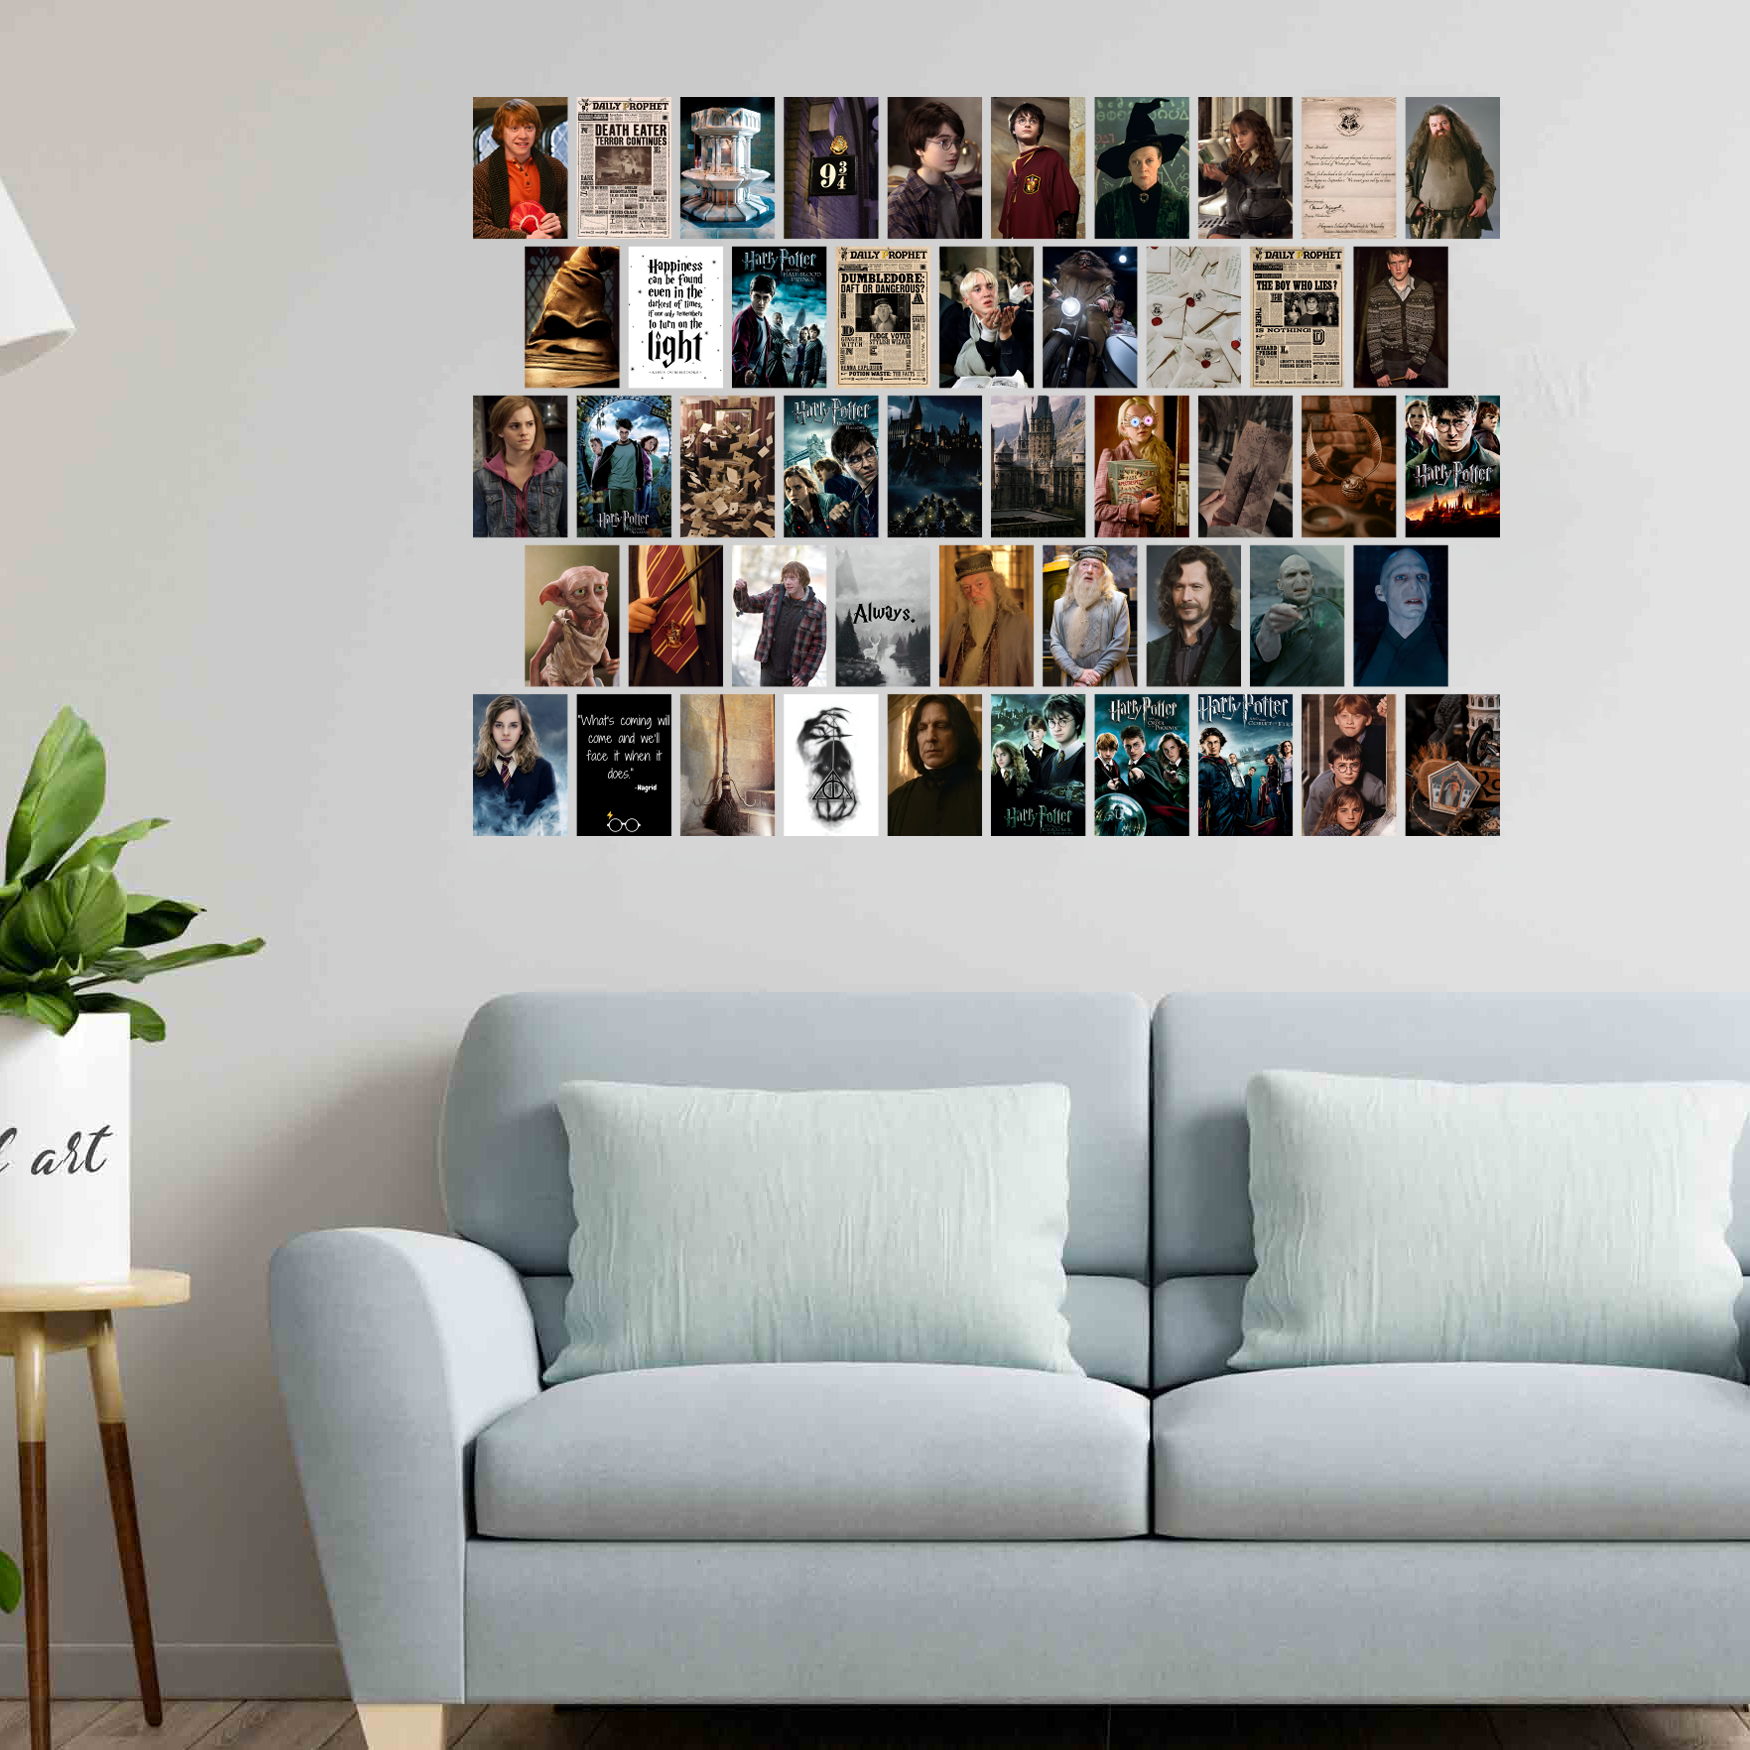 Poster HARRY POTTER 5 - collage | Wall Art, Gifts & Merchandise 